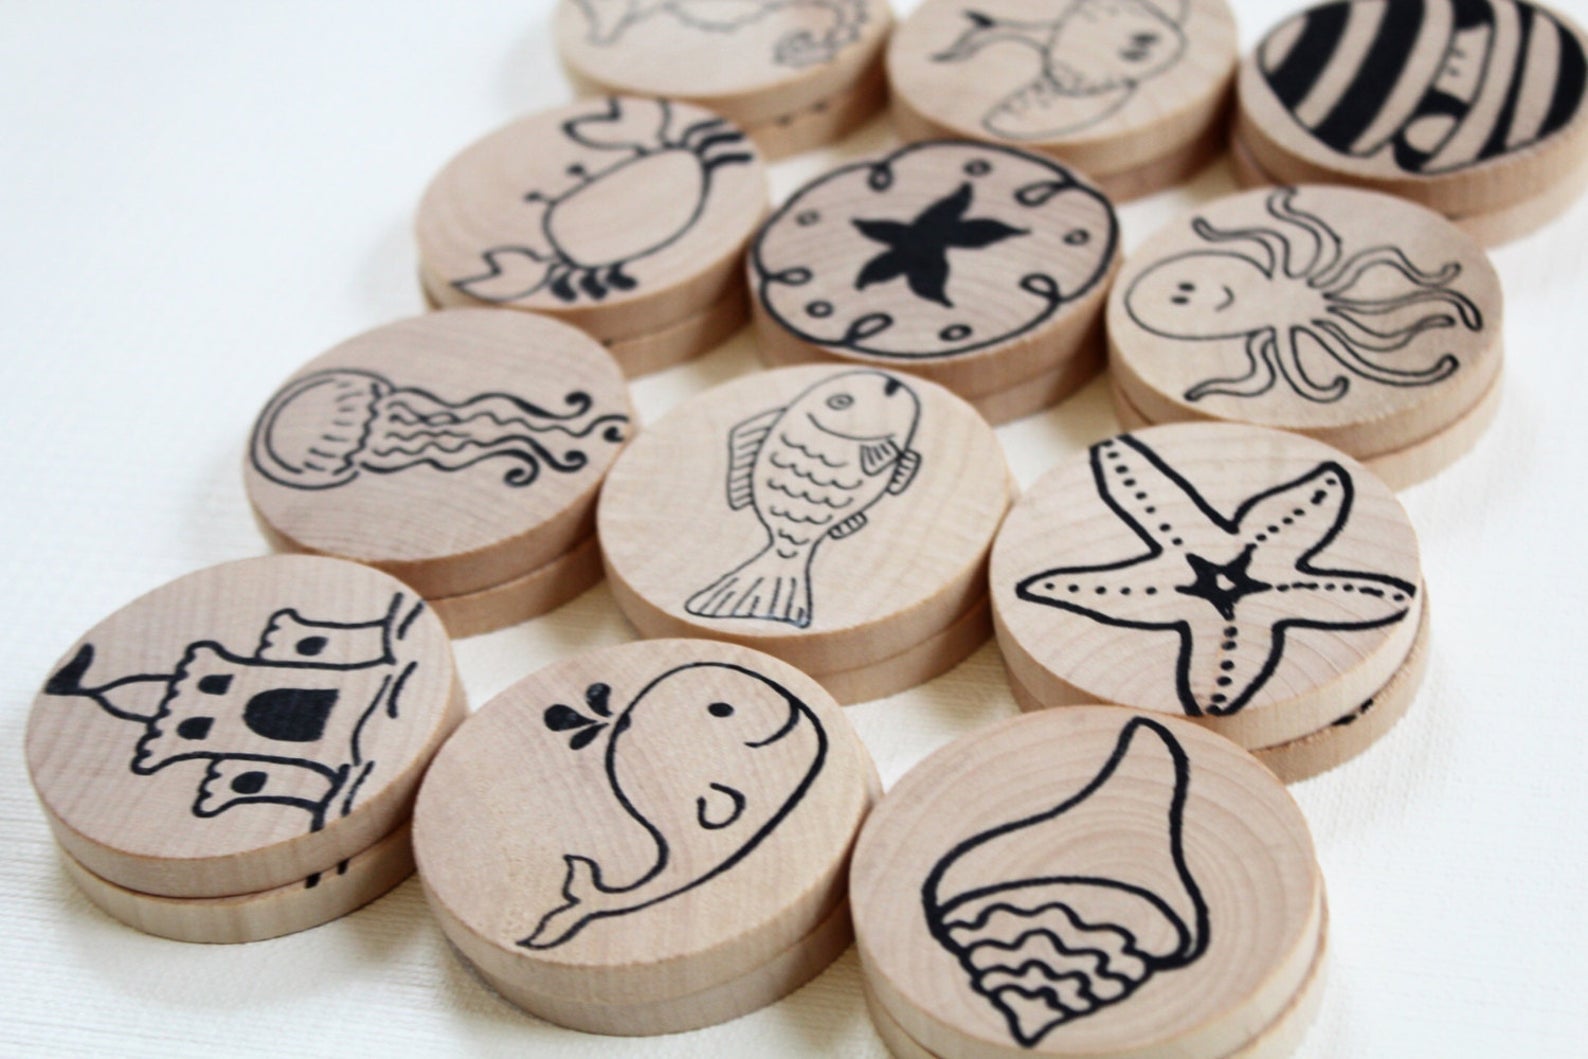 Wooden matching game